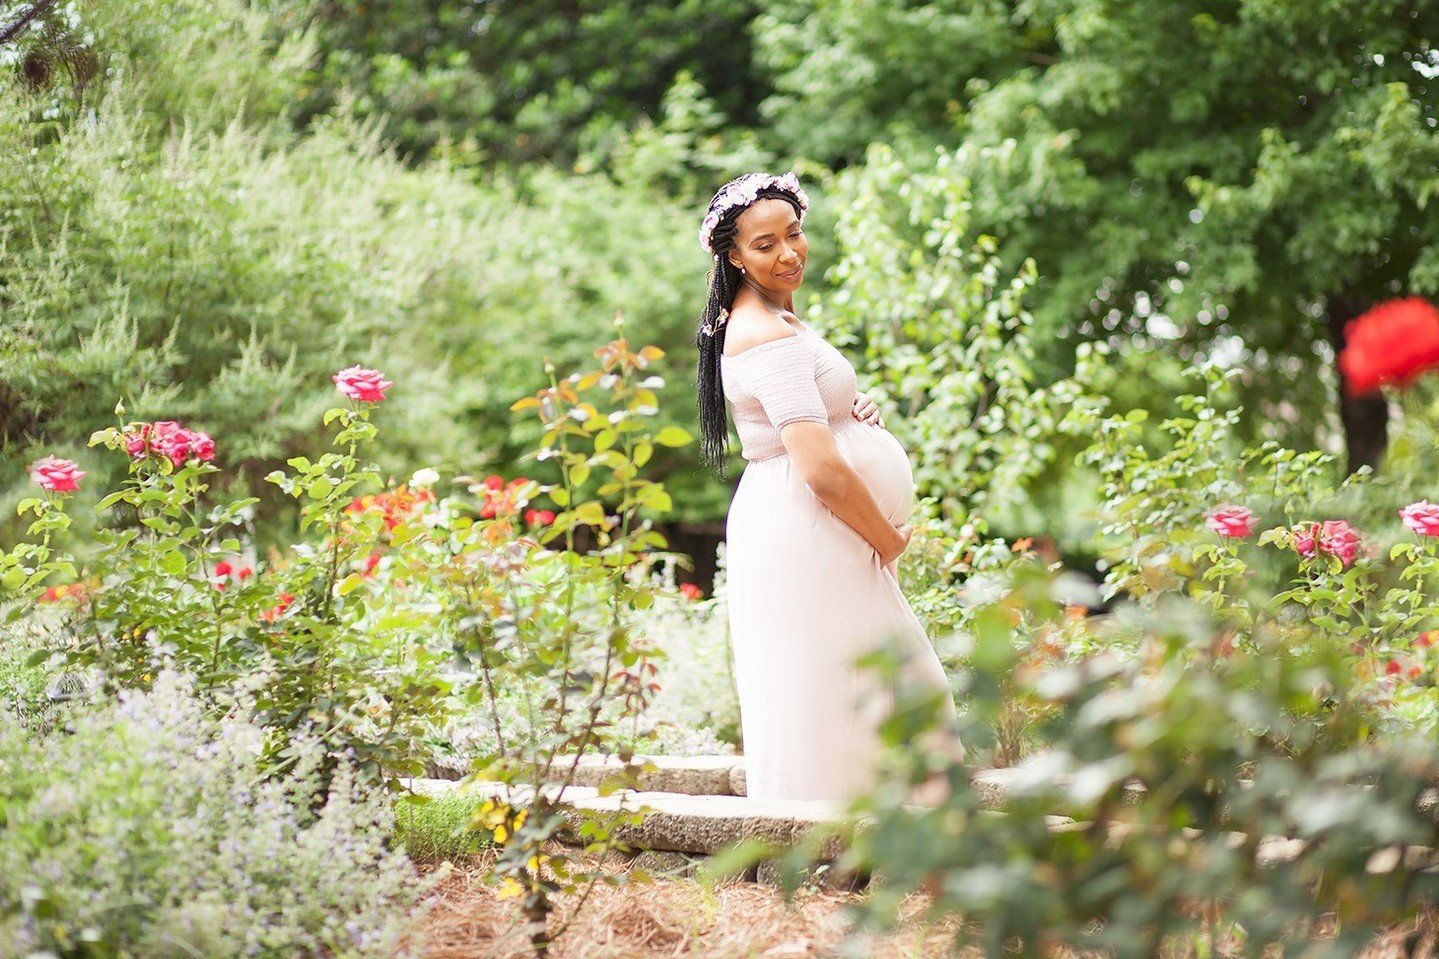 Best time to book your outdoor maternity photoshoot?⁠
In the morning or late afternoon for best light.⁠
⁠
If you are really trying to avoid the heat early in the morning is best.⁠
⁠
We are now taking outdoor portrait sessions.⁠
⁠
Book your on locatio